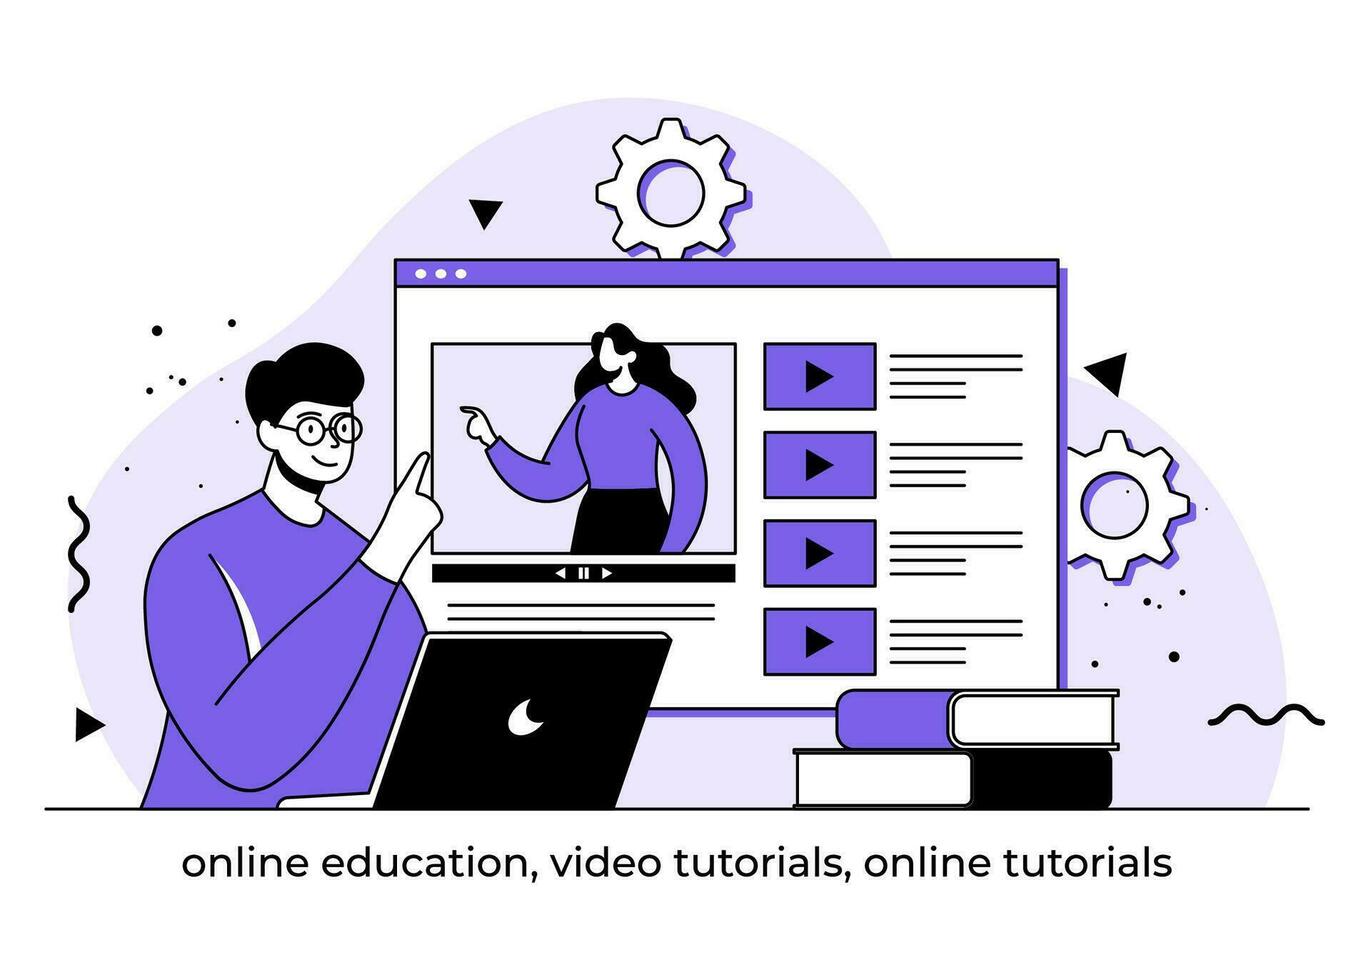 Online education flat illustration, Video tutorials, Online tutorials, E-learning, Online course, Online webinar, Students learning online scene, Distance education, Online Studying vector